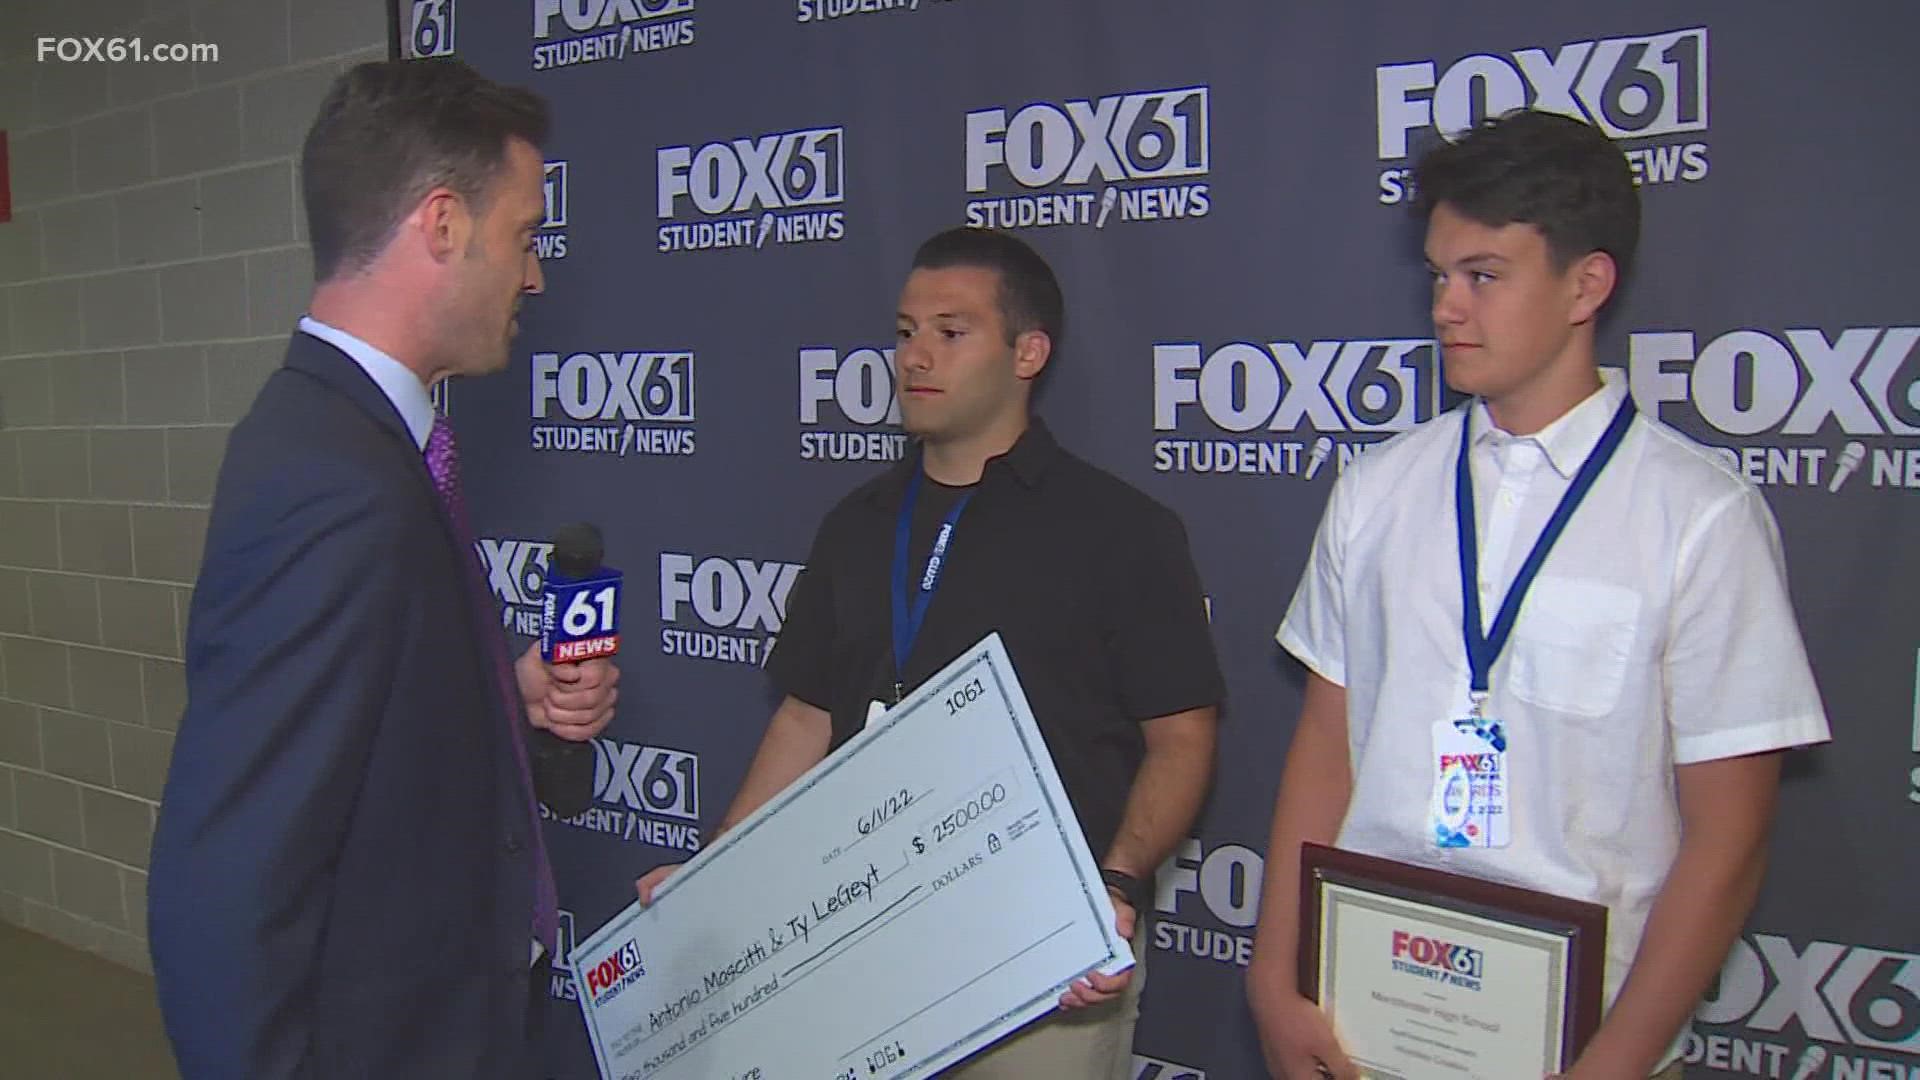 FOX61 presented more than $15,000 worth of awards money to students.